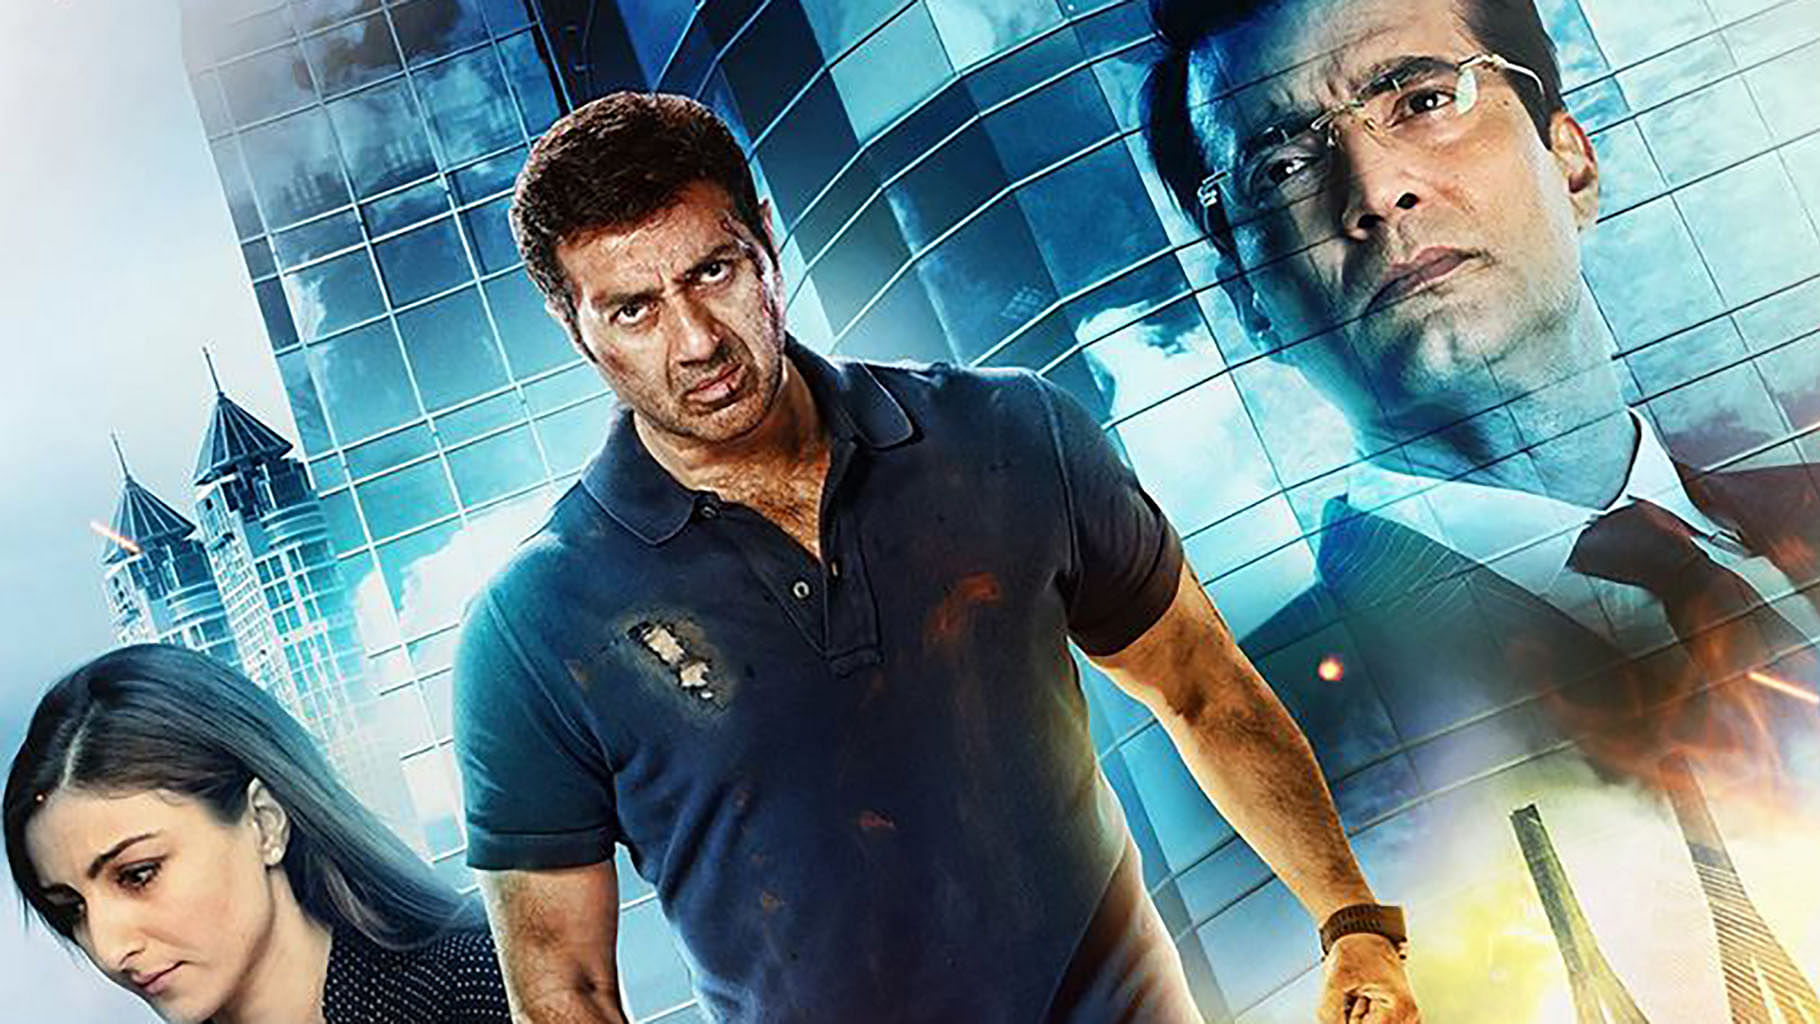 The poster of <i>Ghayal Once Again</i>. (Photo: <a href="https://www.facebook.com/ghayalagain/photos/pb.374696296044844.-2207520000.1454690453./523405687840570/?type=3&amp;theater">Faceb</a><a href="https://www.facebook.com/ghayalagain/photos/pb.374696296044844.-2207520000.1454690453./523405687840570/?type=3&amp;theater">ook</a><a href="https://www.facebook.com/ghayalagain/photos/pb.374696296044844.-2207520000.1454690453./523405687840570/?type=3&amp;theater">/<i>Ghayal Once Again</i></a>)